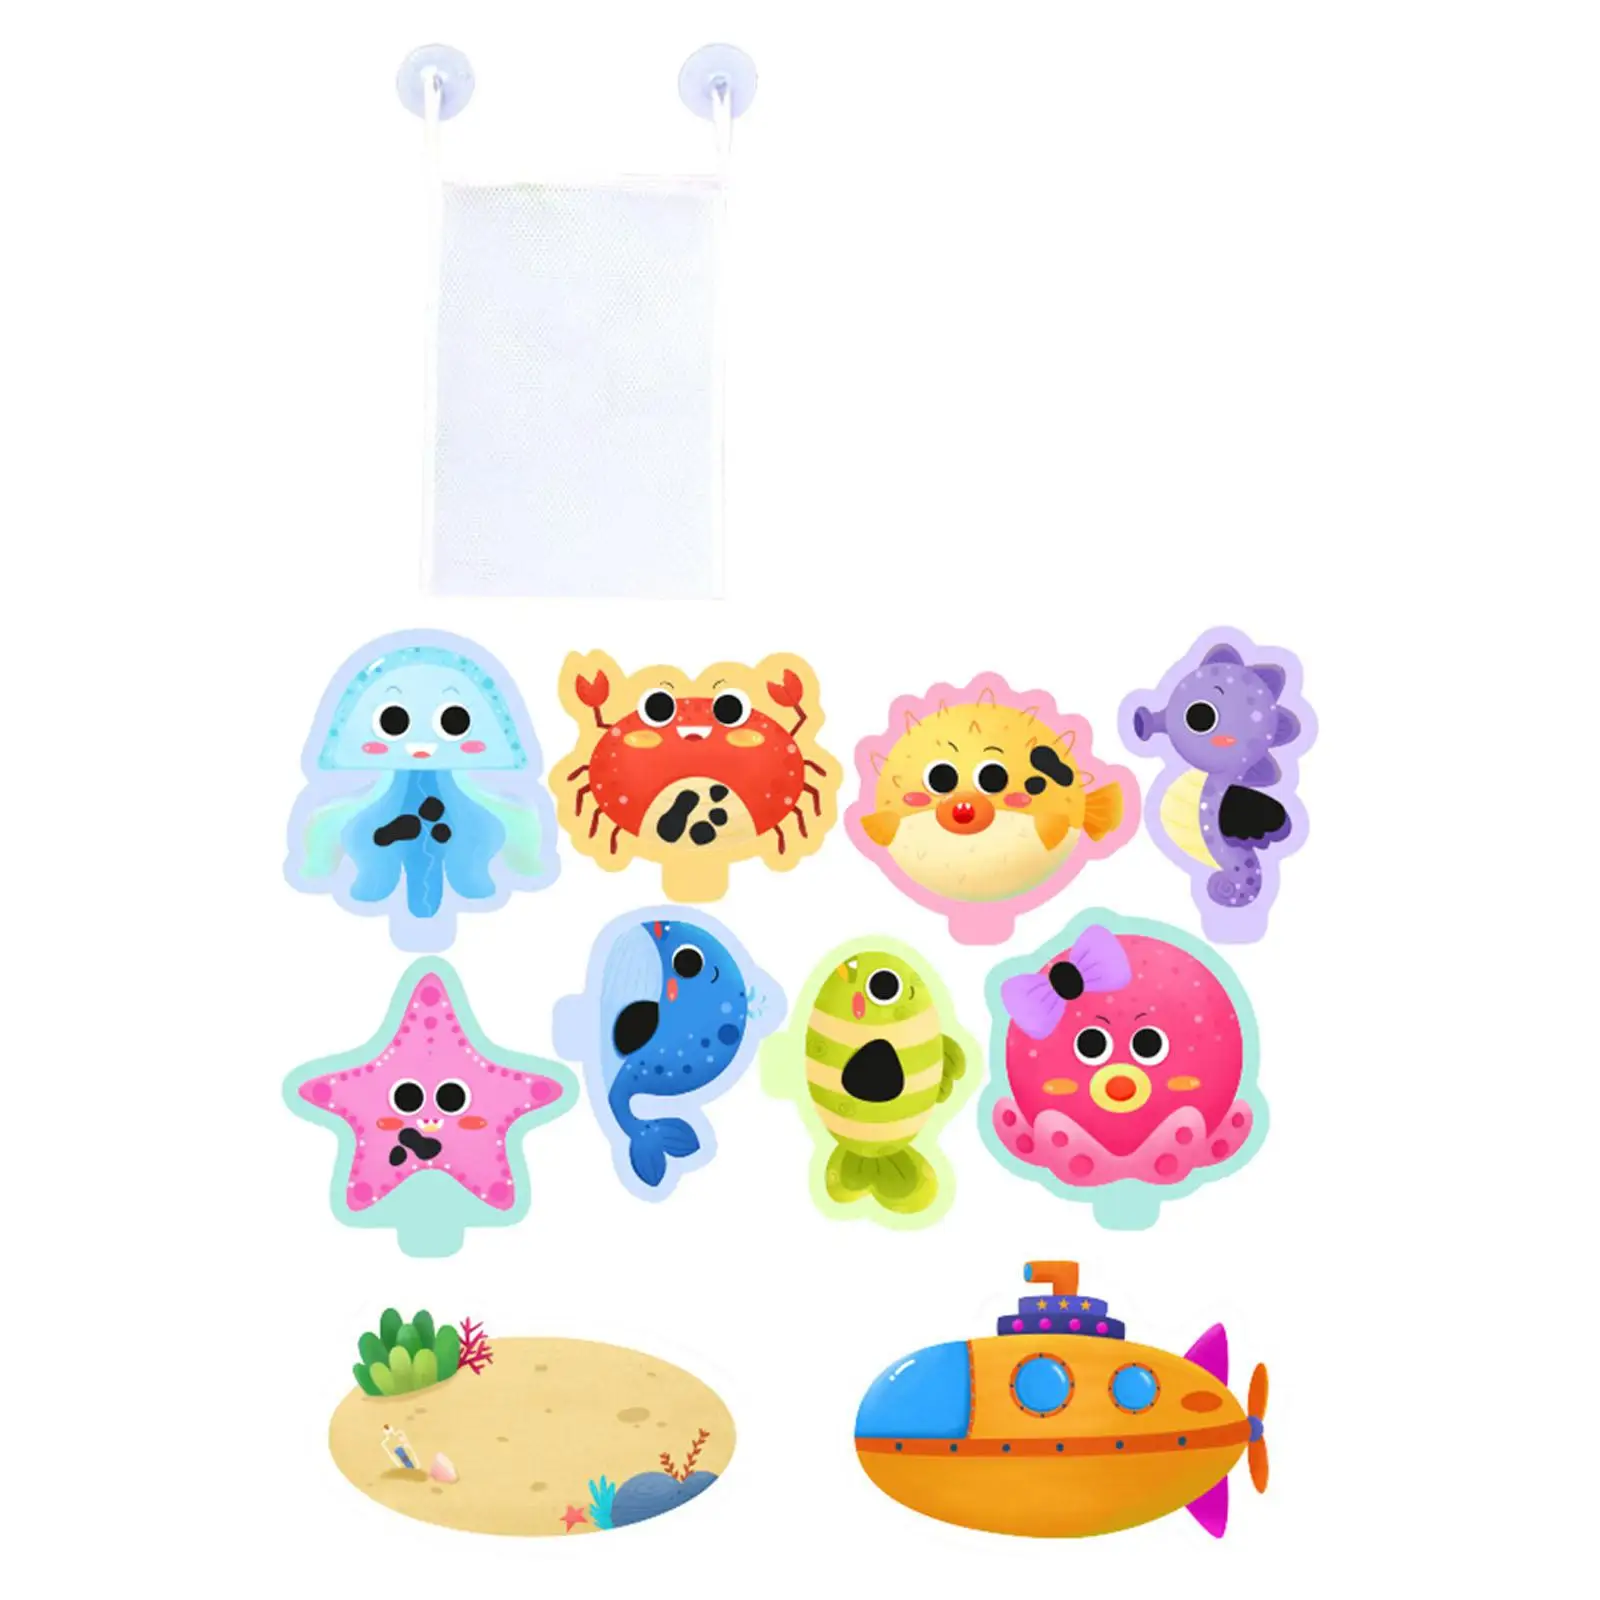 10x Early Education DIY Sticker Puzzles Toys with Storage Bag Cognitive Preschool Game Baby Sea Animal Bath Toys for Kids